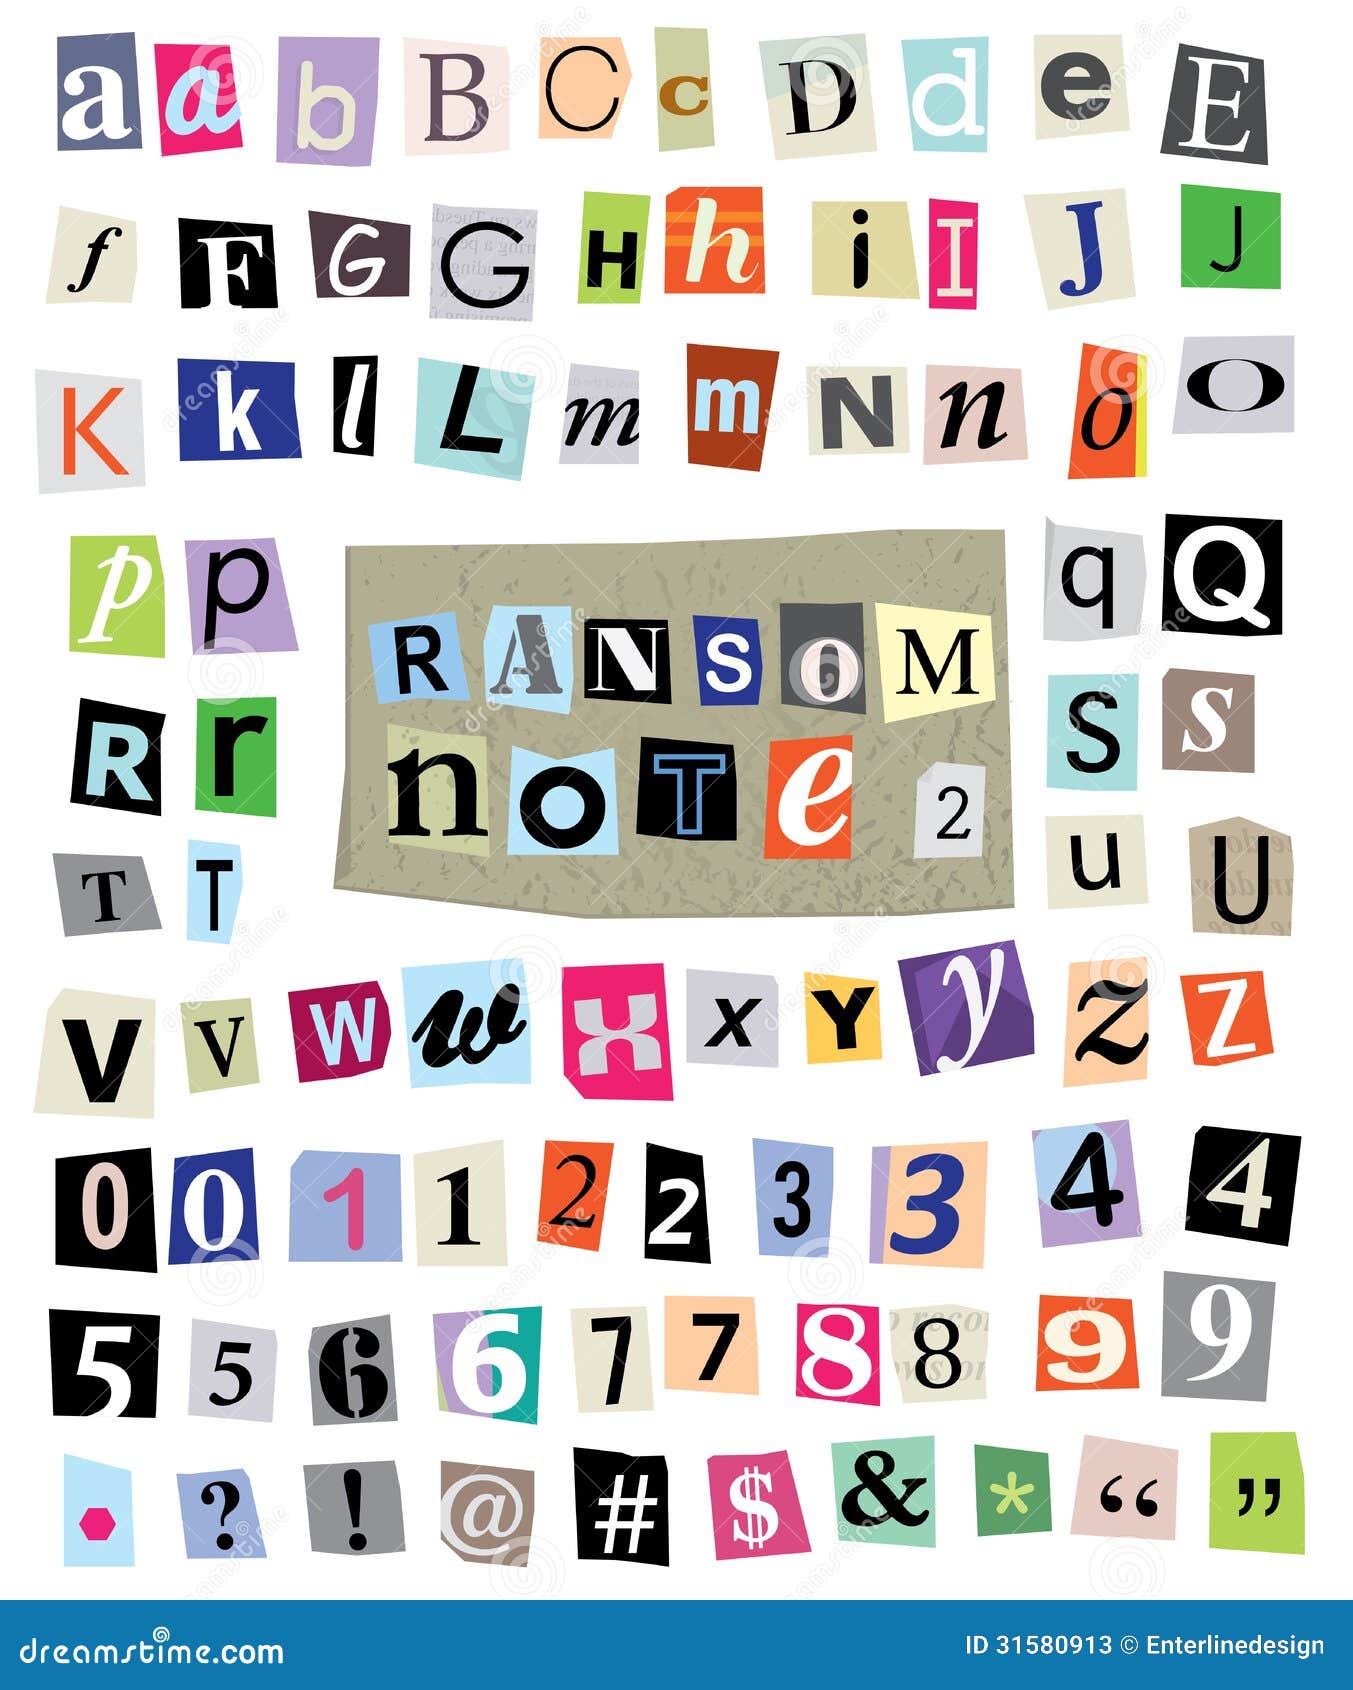 Vector Ransom Note #1- Cut Paper Letters, Numbers, Symbols Stock Vector